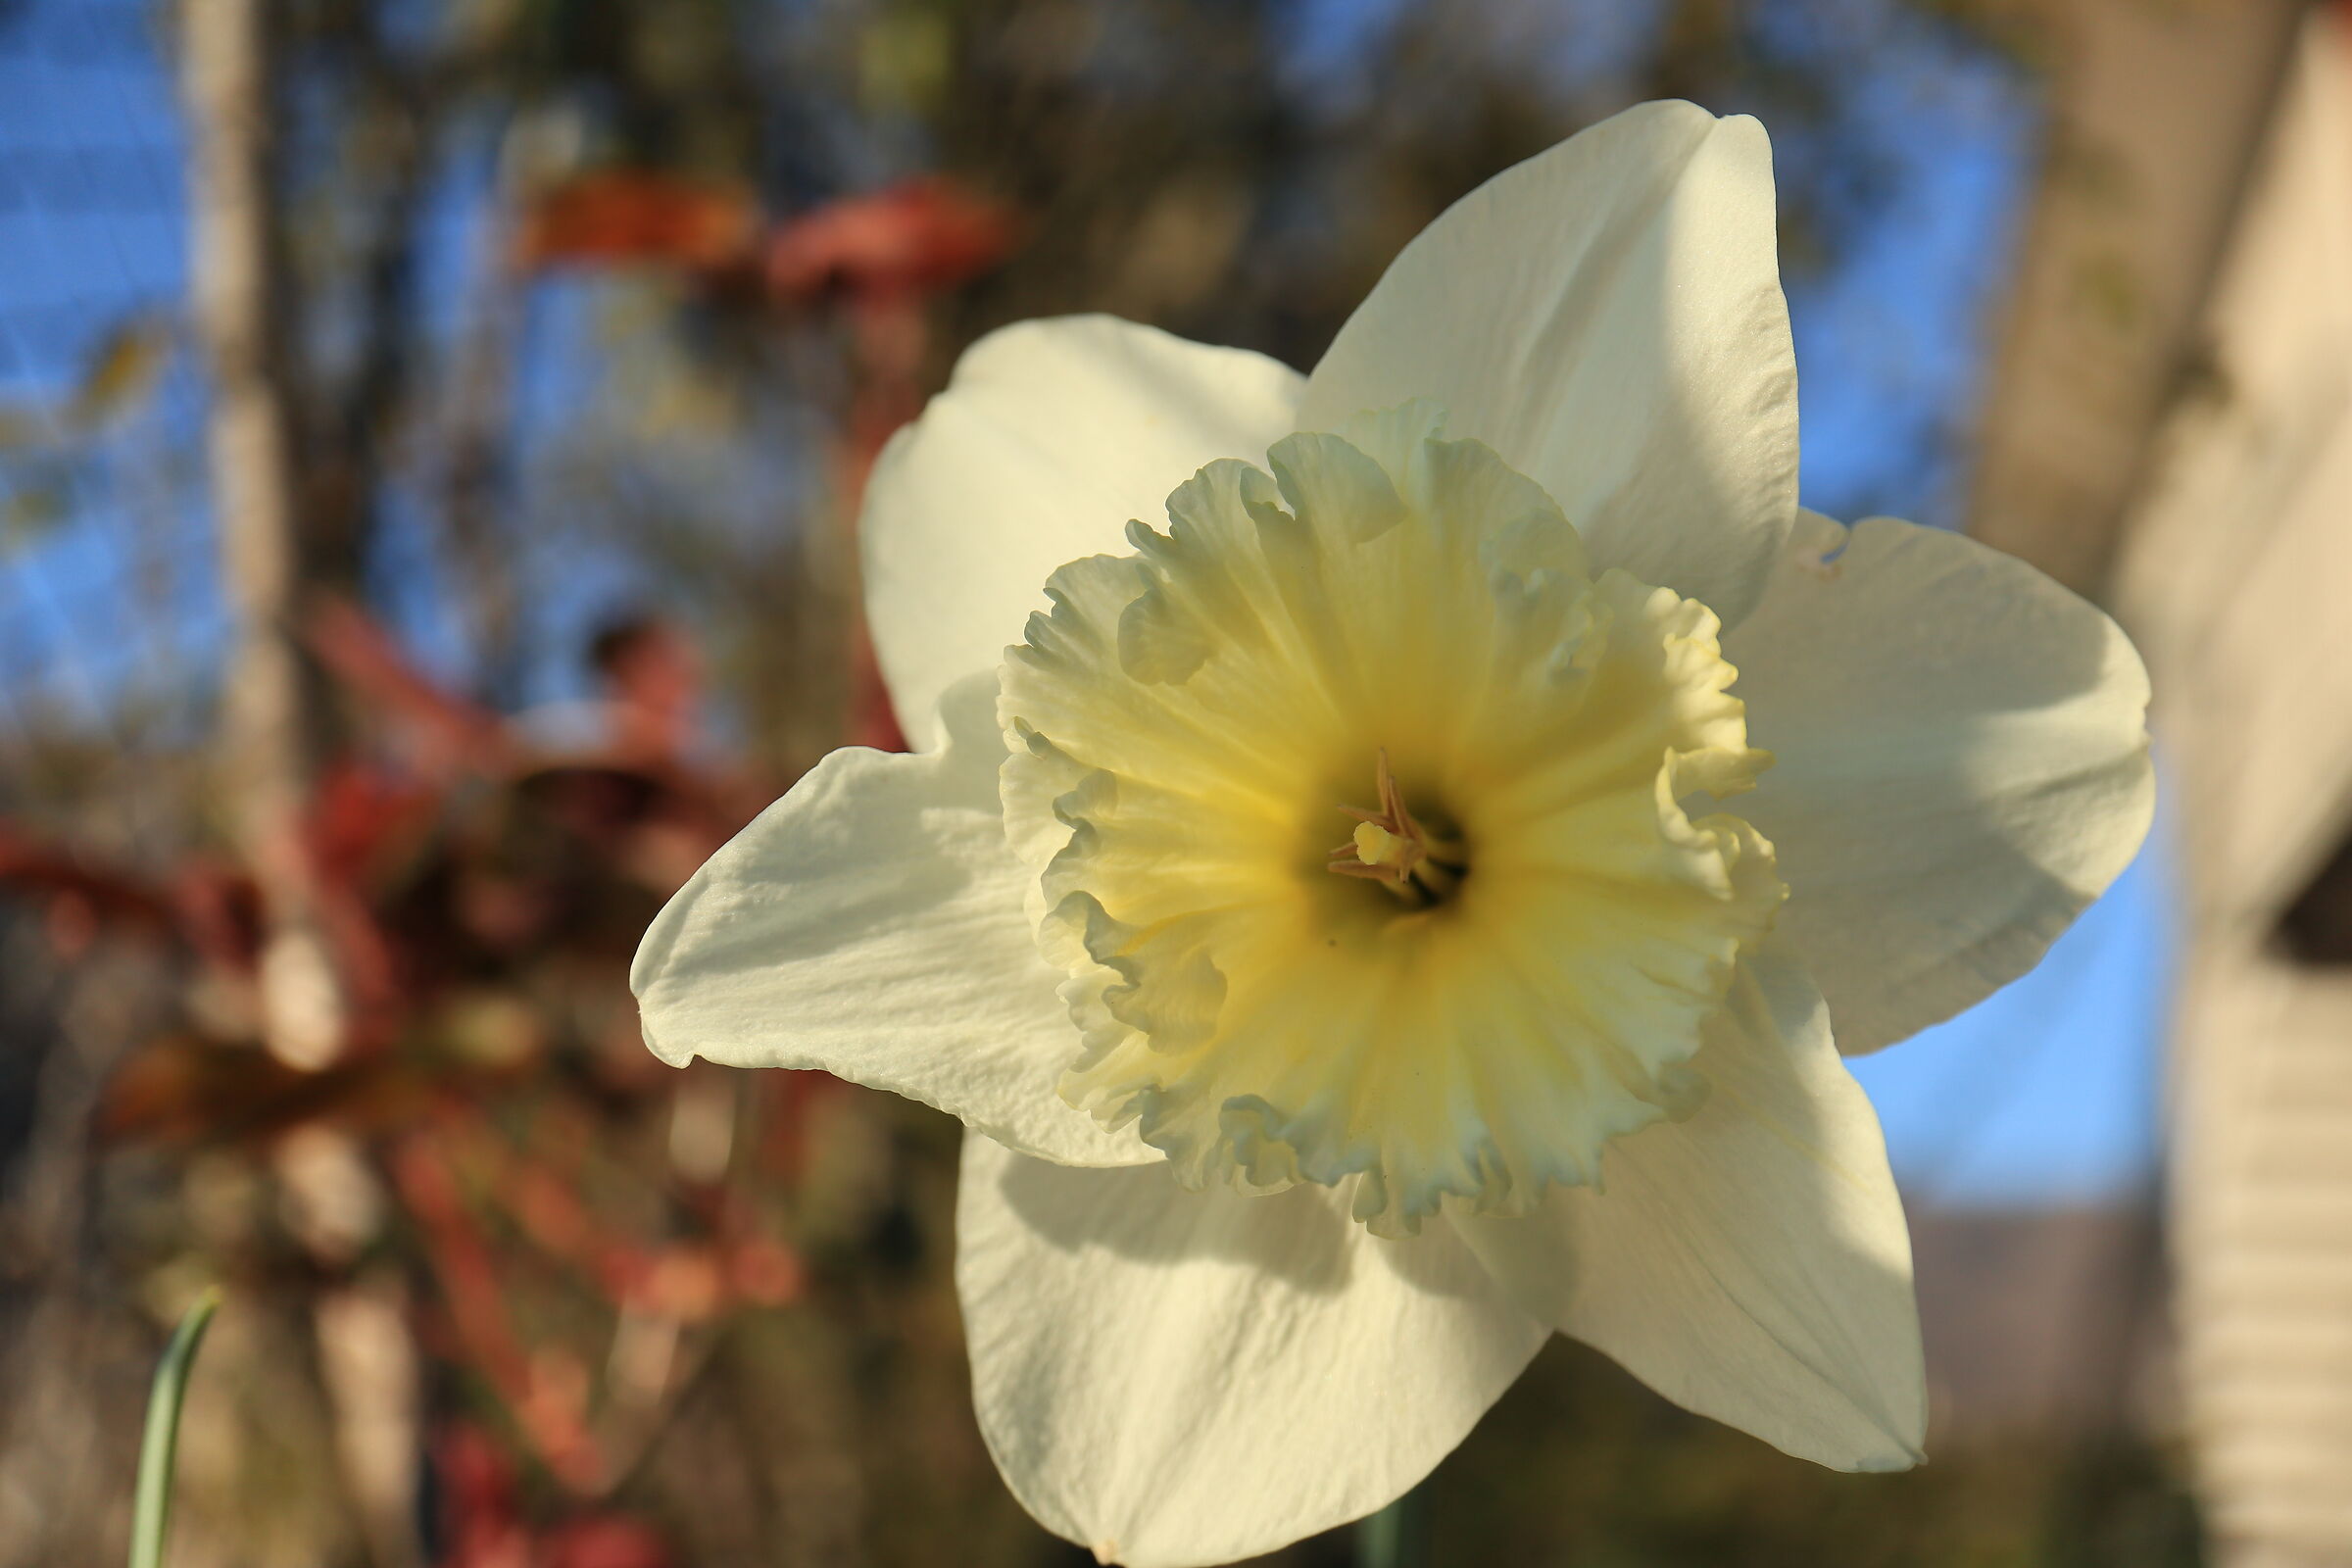 Narcissus welcome...